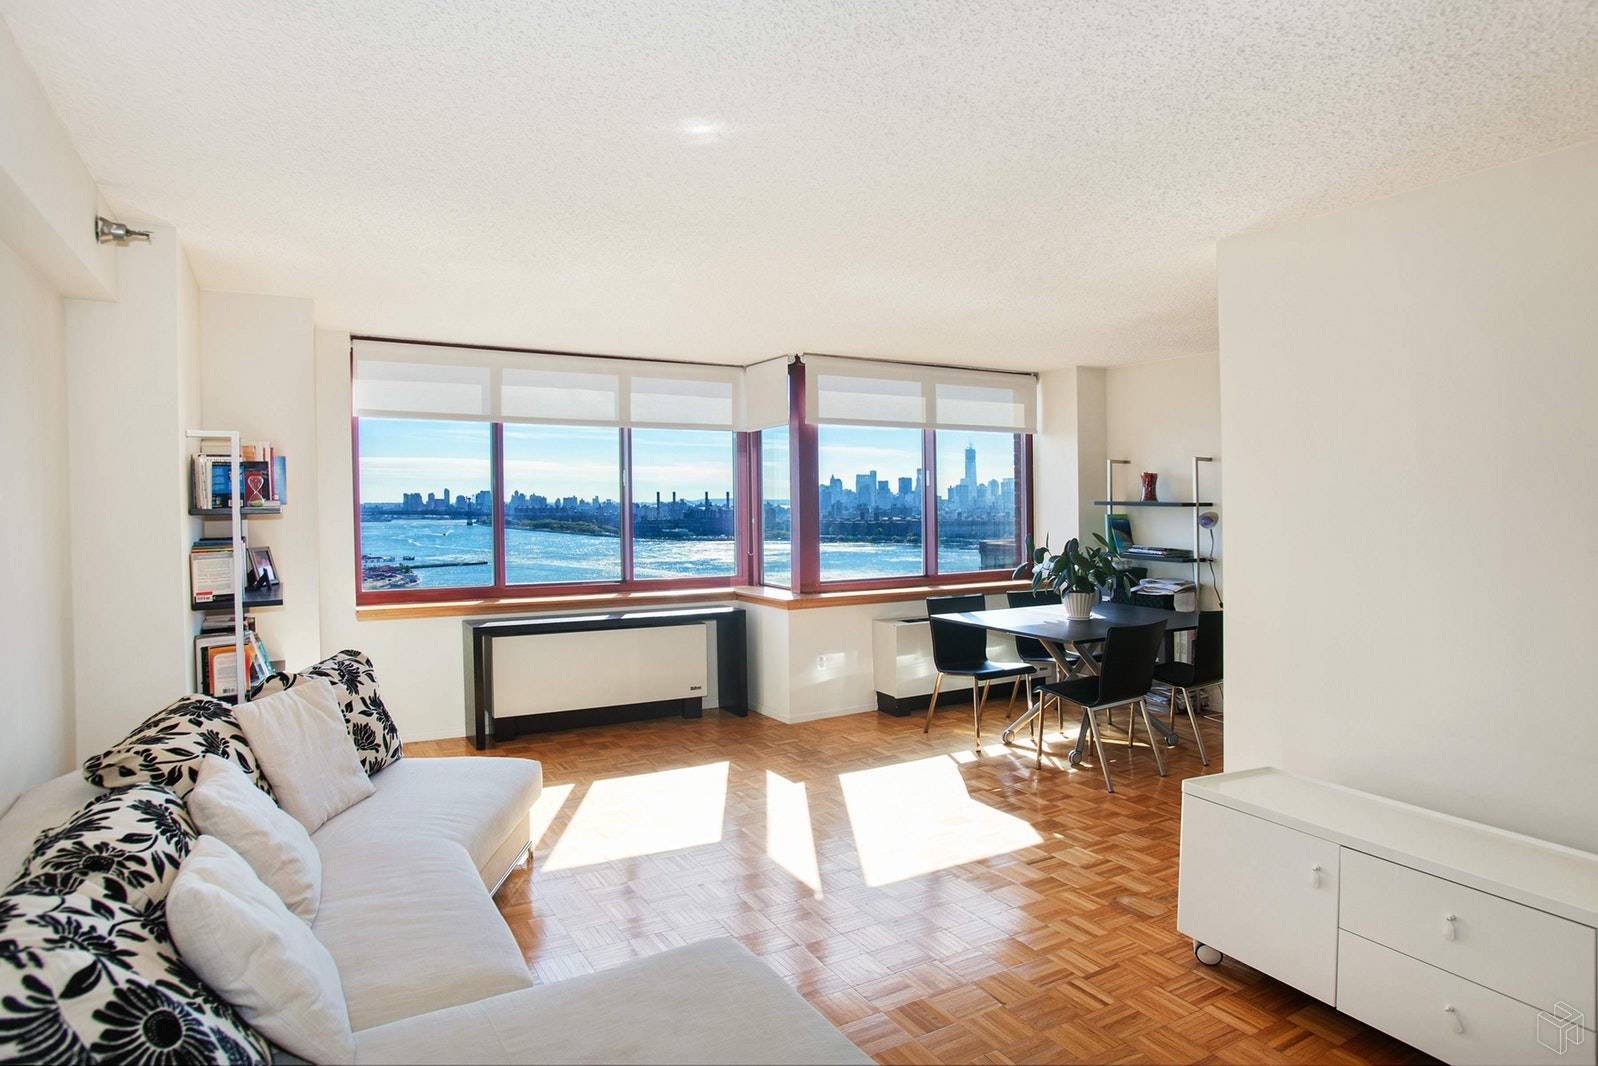 Enjoy gracious living in this exquisite spacious Convertible 2 Bedroom residence featuring a panorama of the Manhattan and Queens skylines.